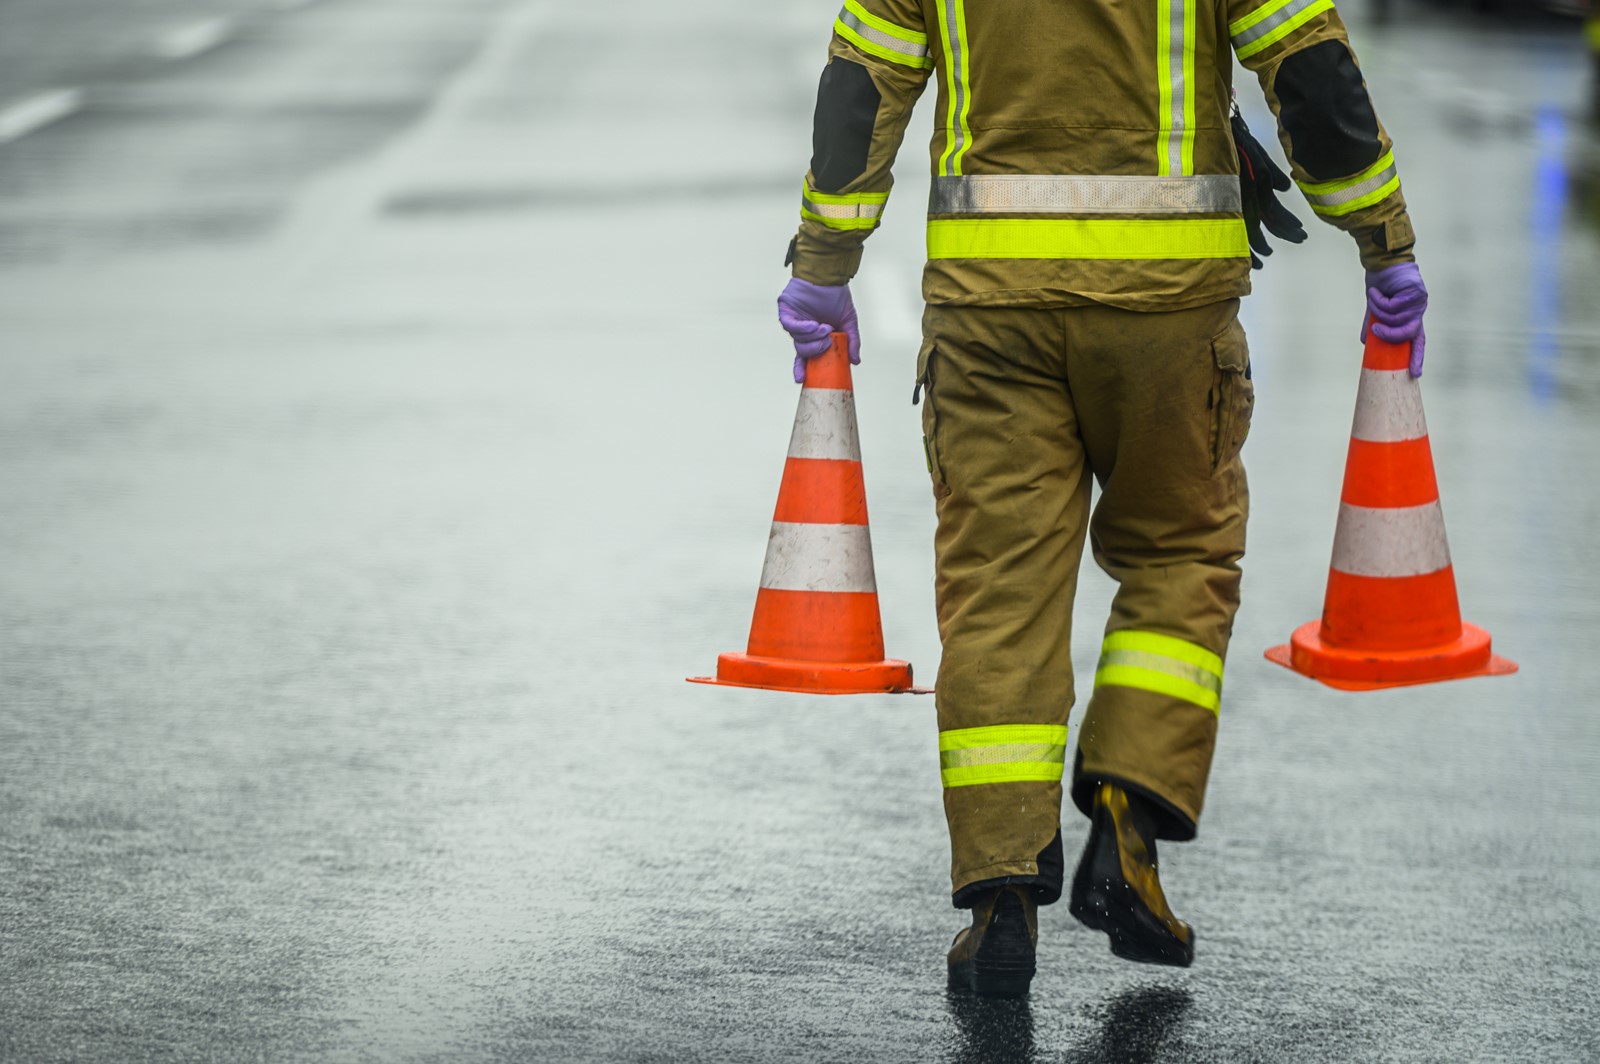 Highway Worker Preparing For Road Closure Moving Two Traffic Cones